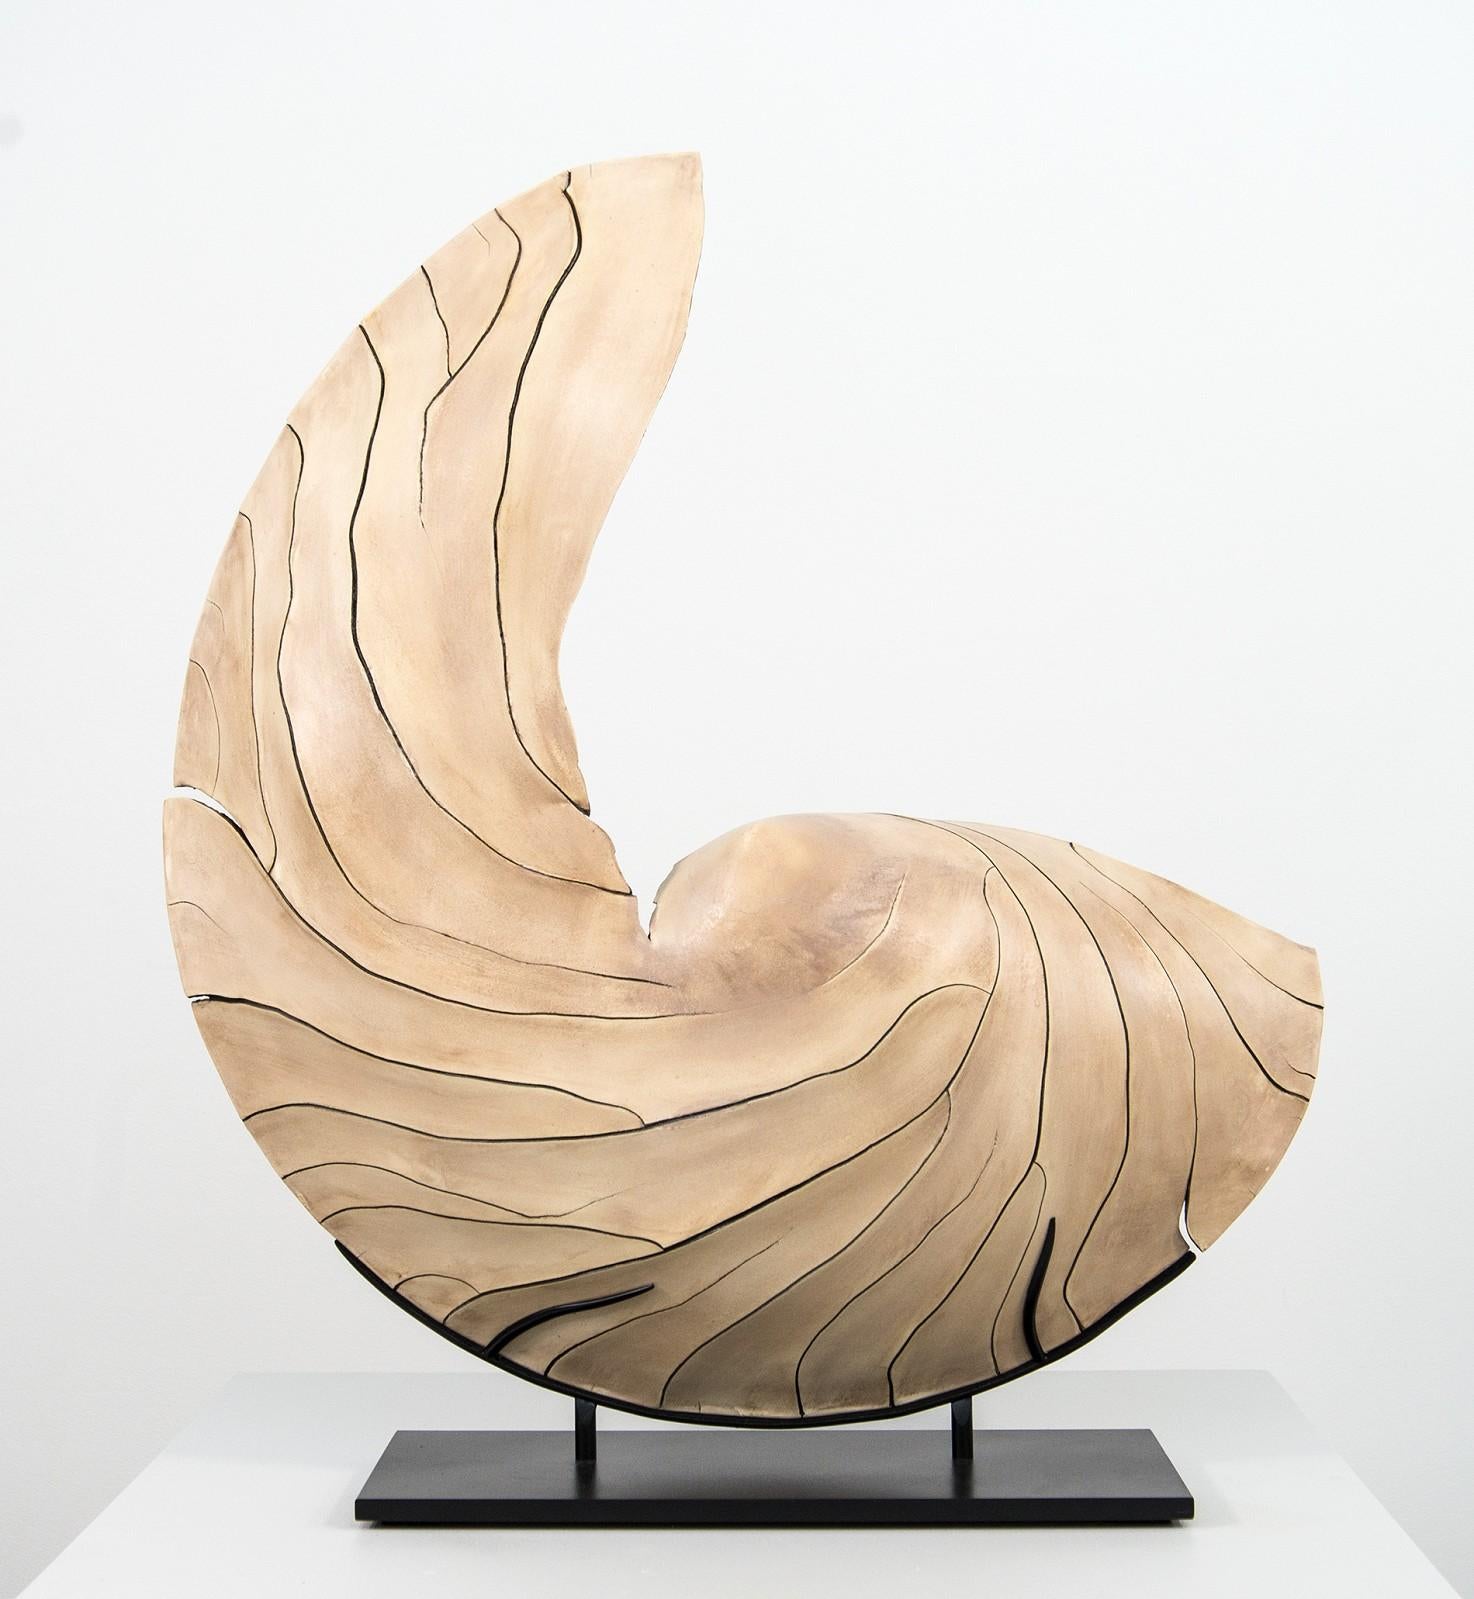 Paula Murray Abstract Sculpture - Taking Flight - intricate, nature-inspired, hand-shaped porcelain clay sculpture